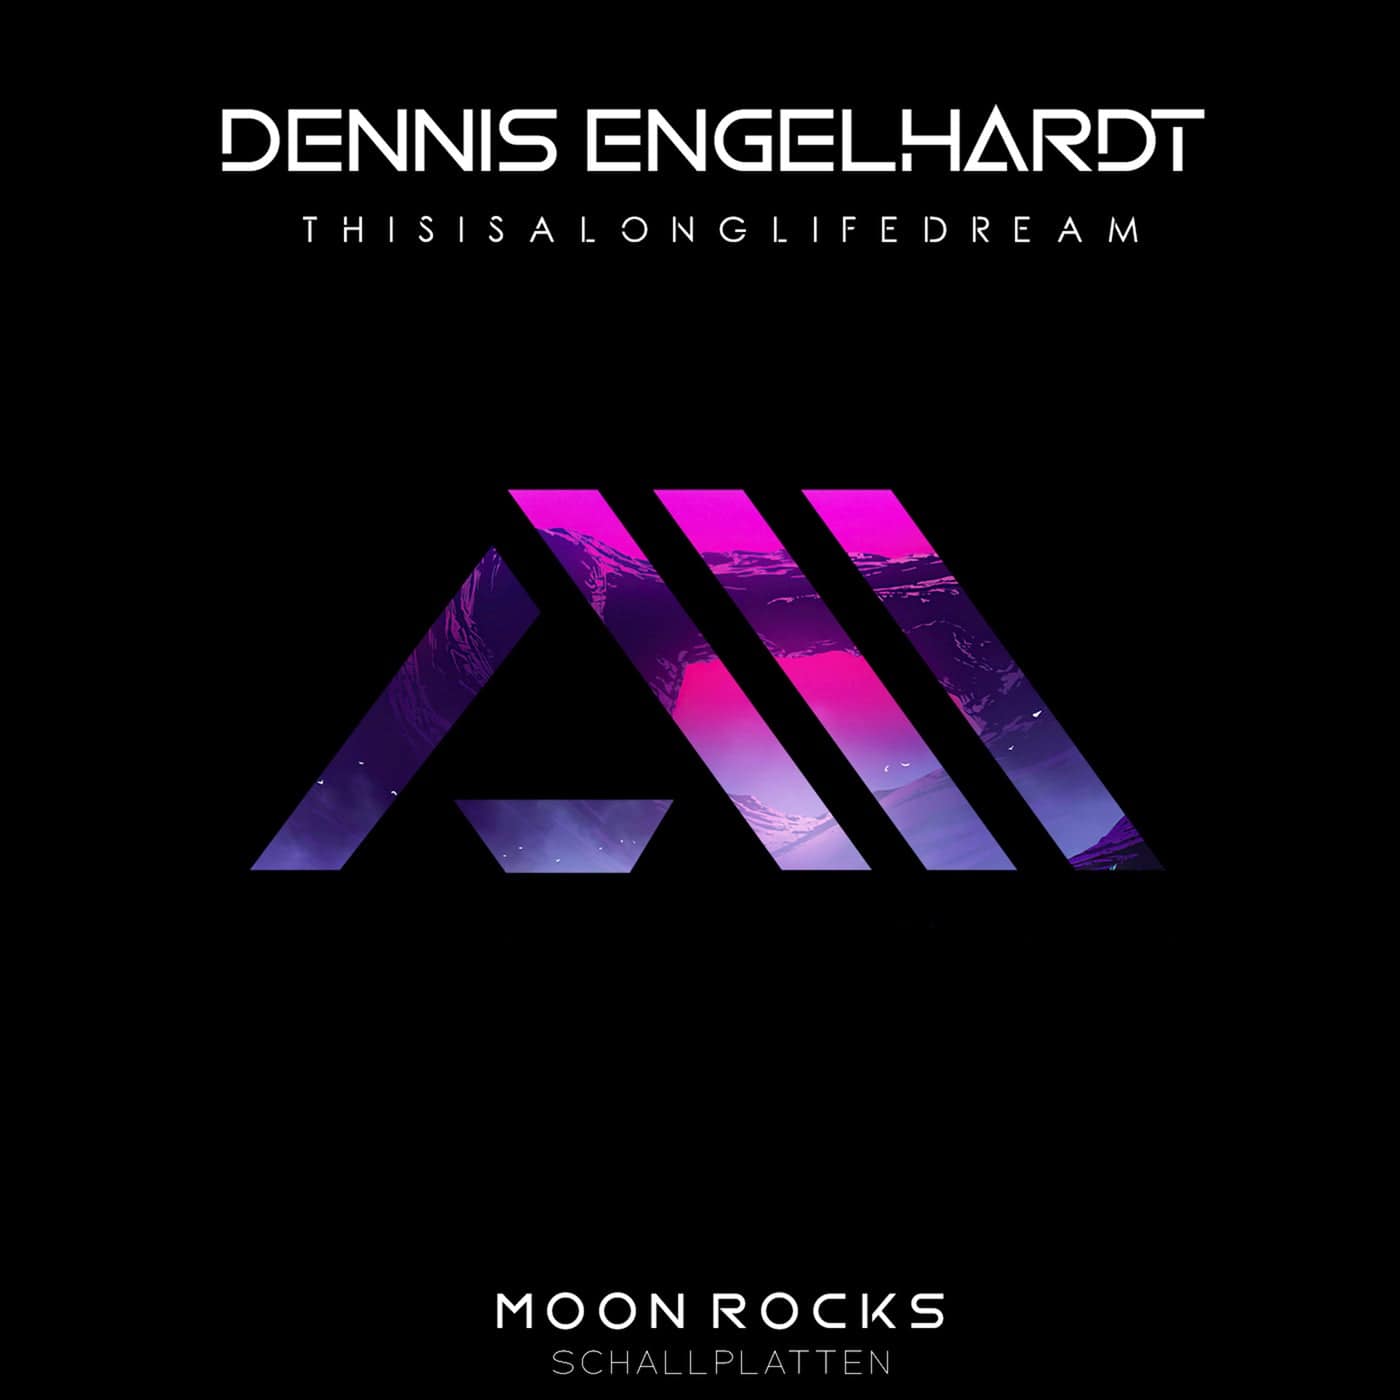 Download Dennis Engelhardt - This Is a Lifelong Dream on Electrobuzz